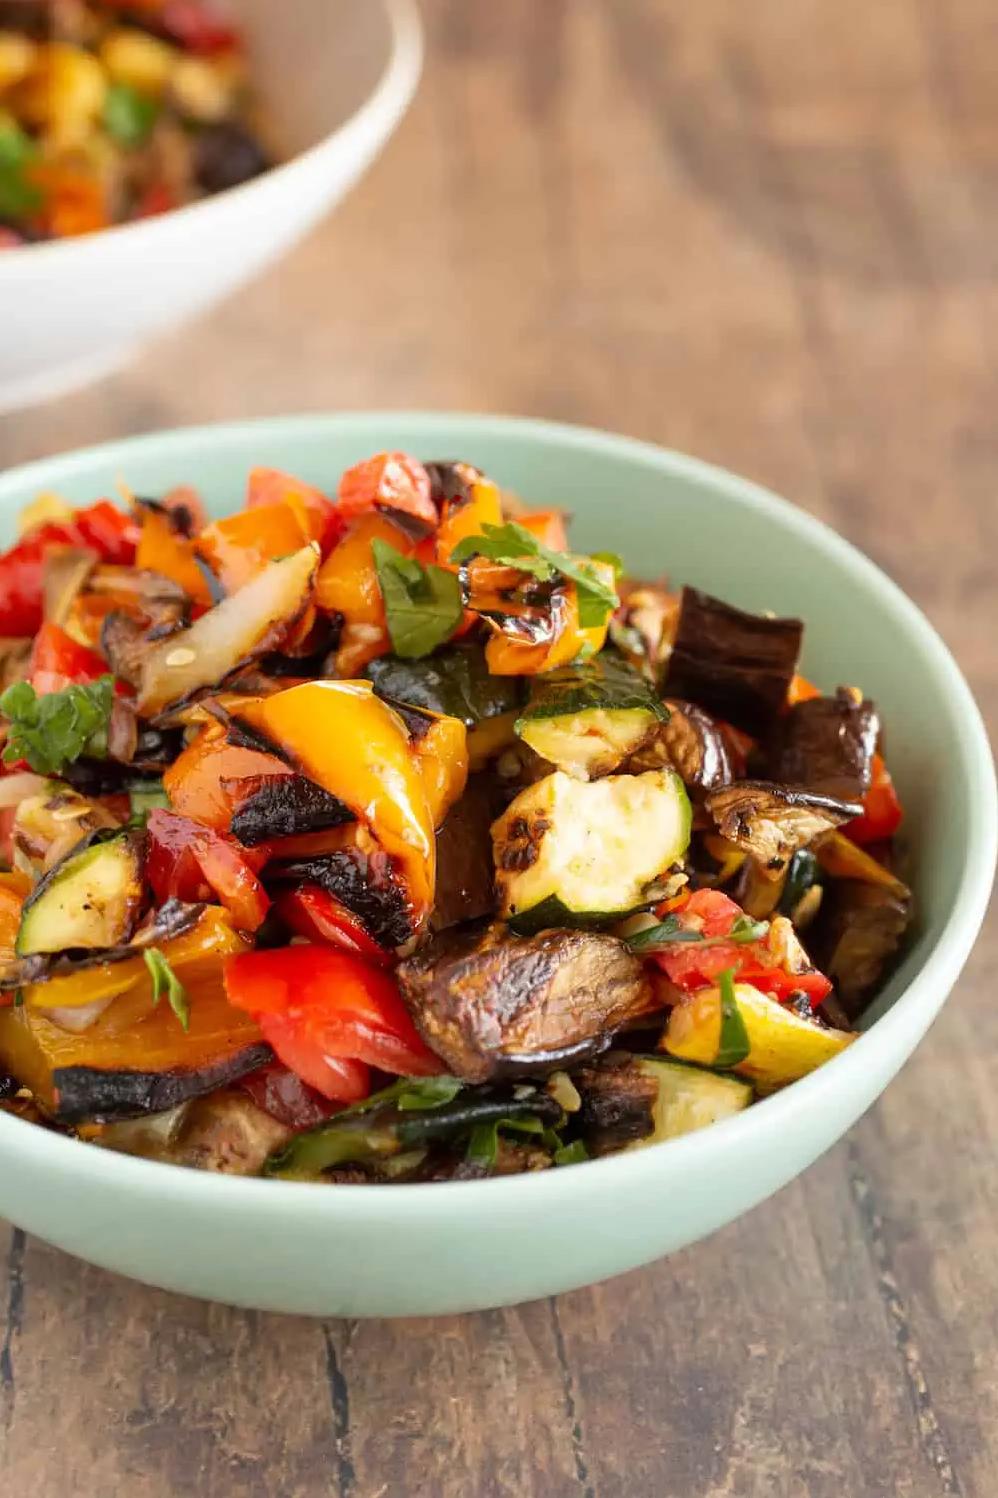  When all the veggies get together, they make a magical dish called ratatouille!